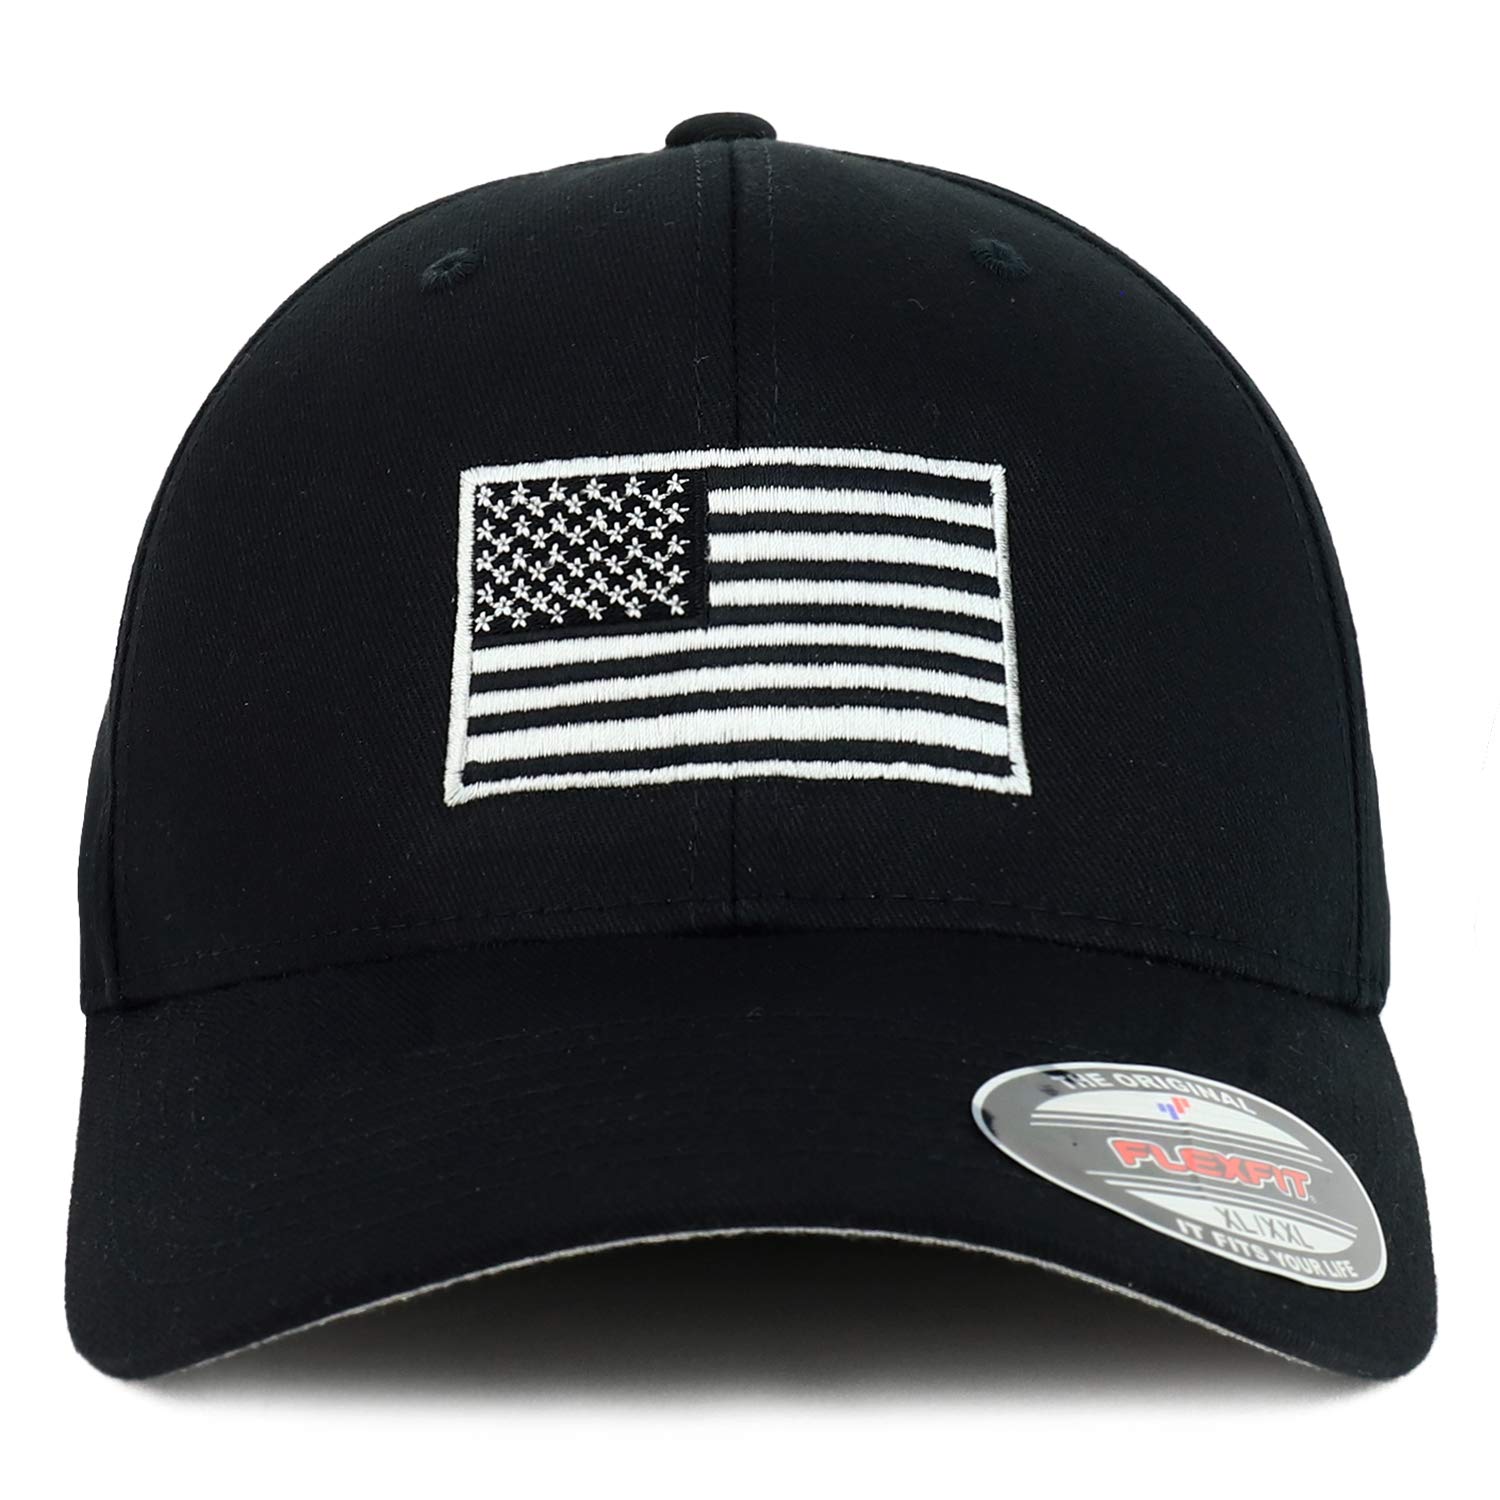 Armycrew USA American Flag Embroidered Flexfit Cap Fits Up to XXL - Black - L-XL